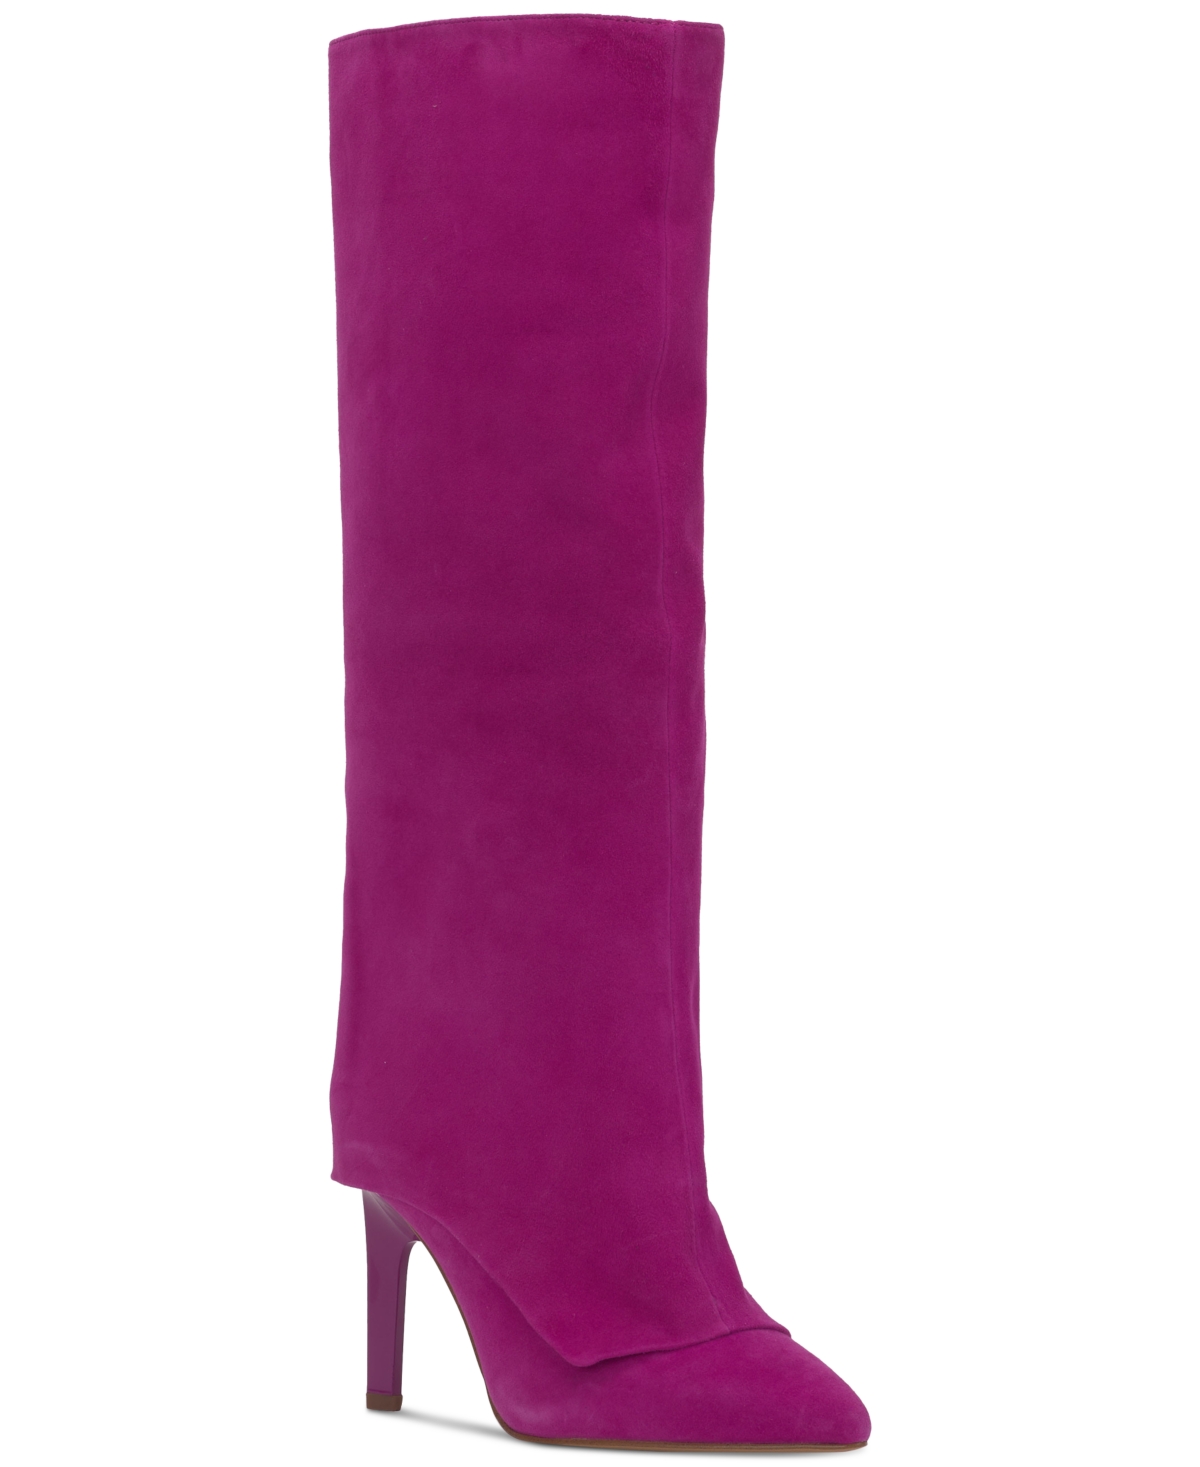 JESSICA SIMPSON BRYKIA POINTED-TOE OVER-THE-KNEE BOOTS